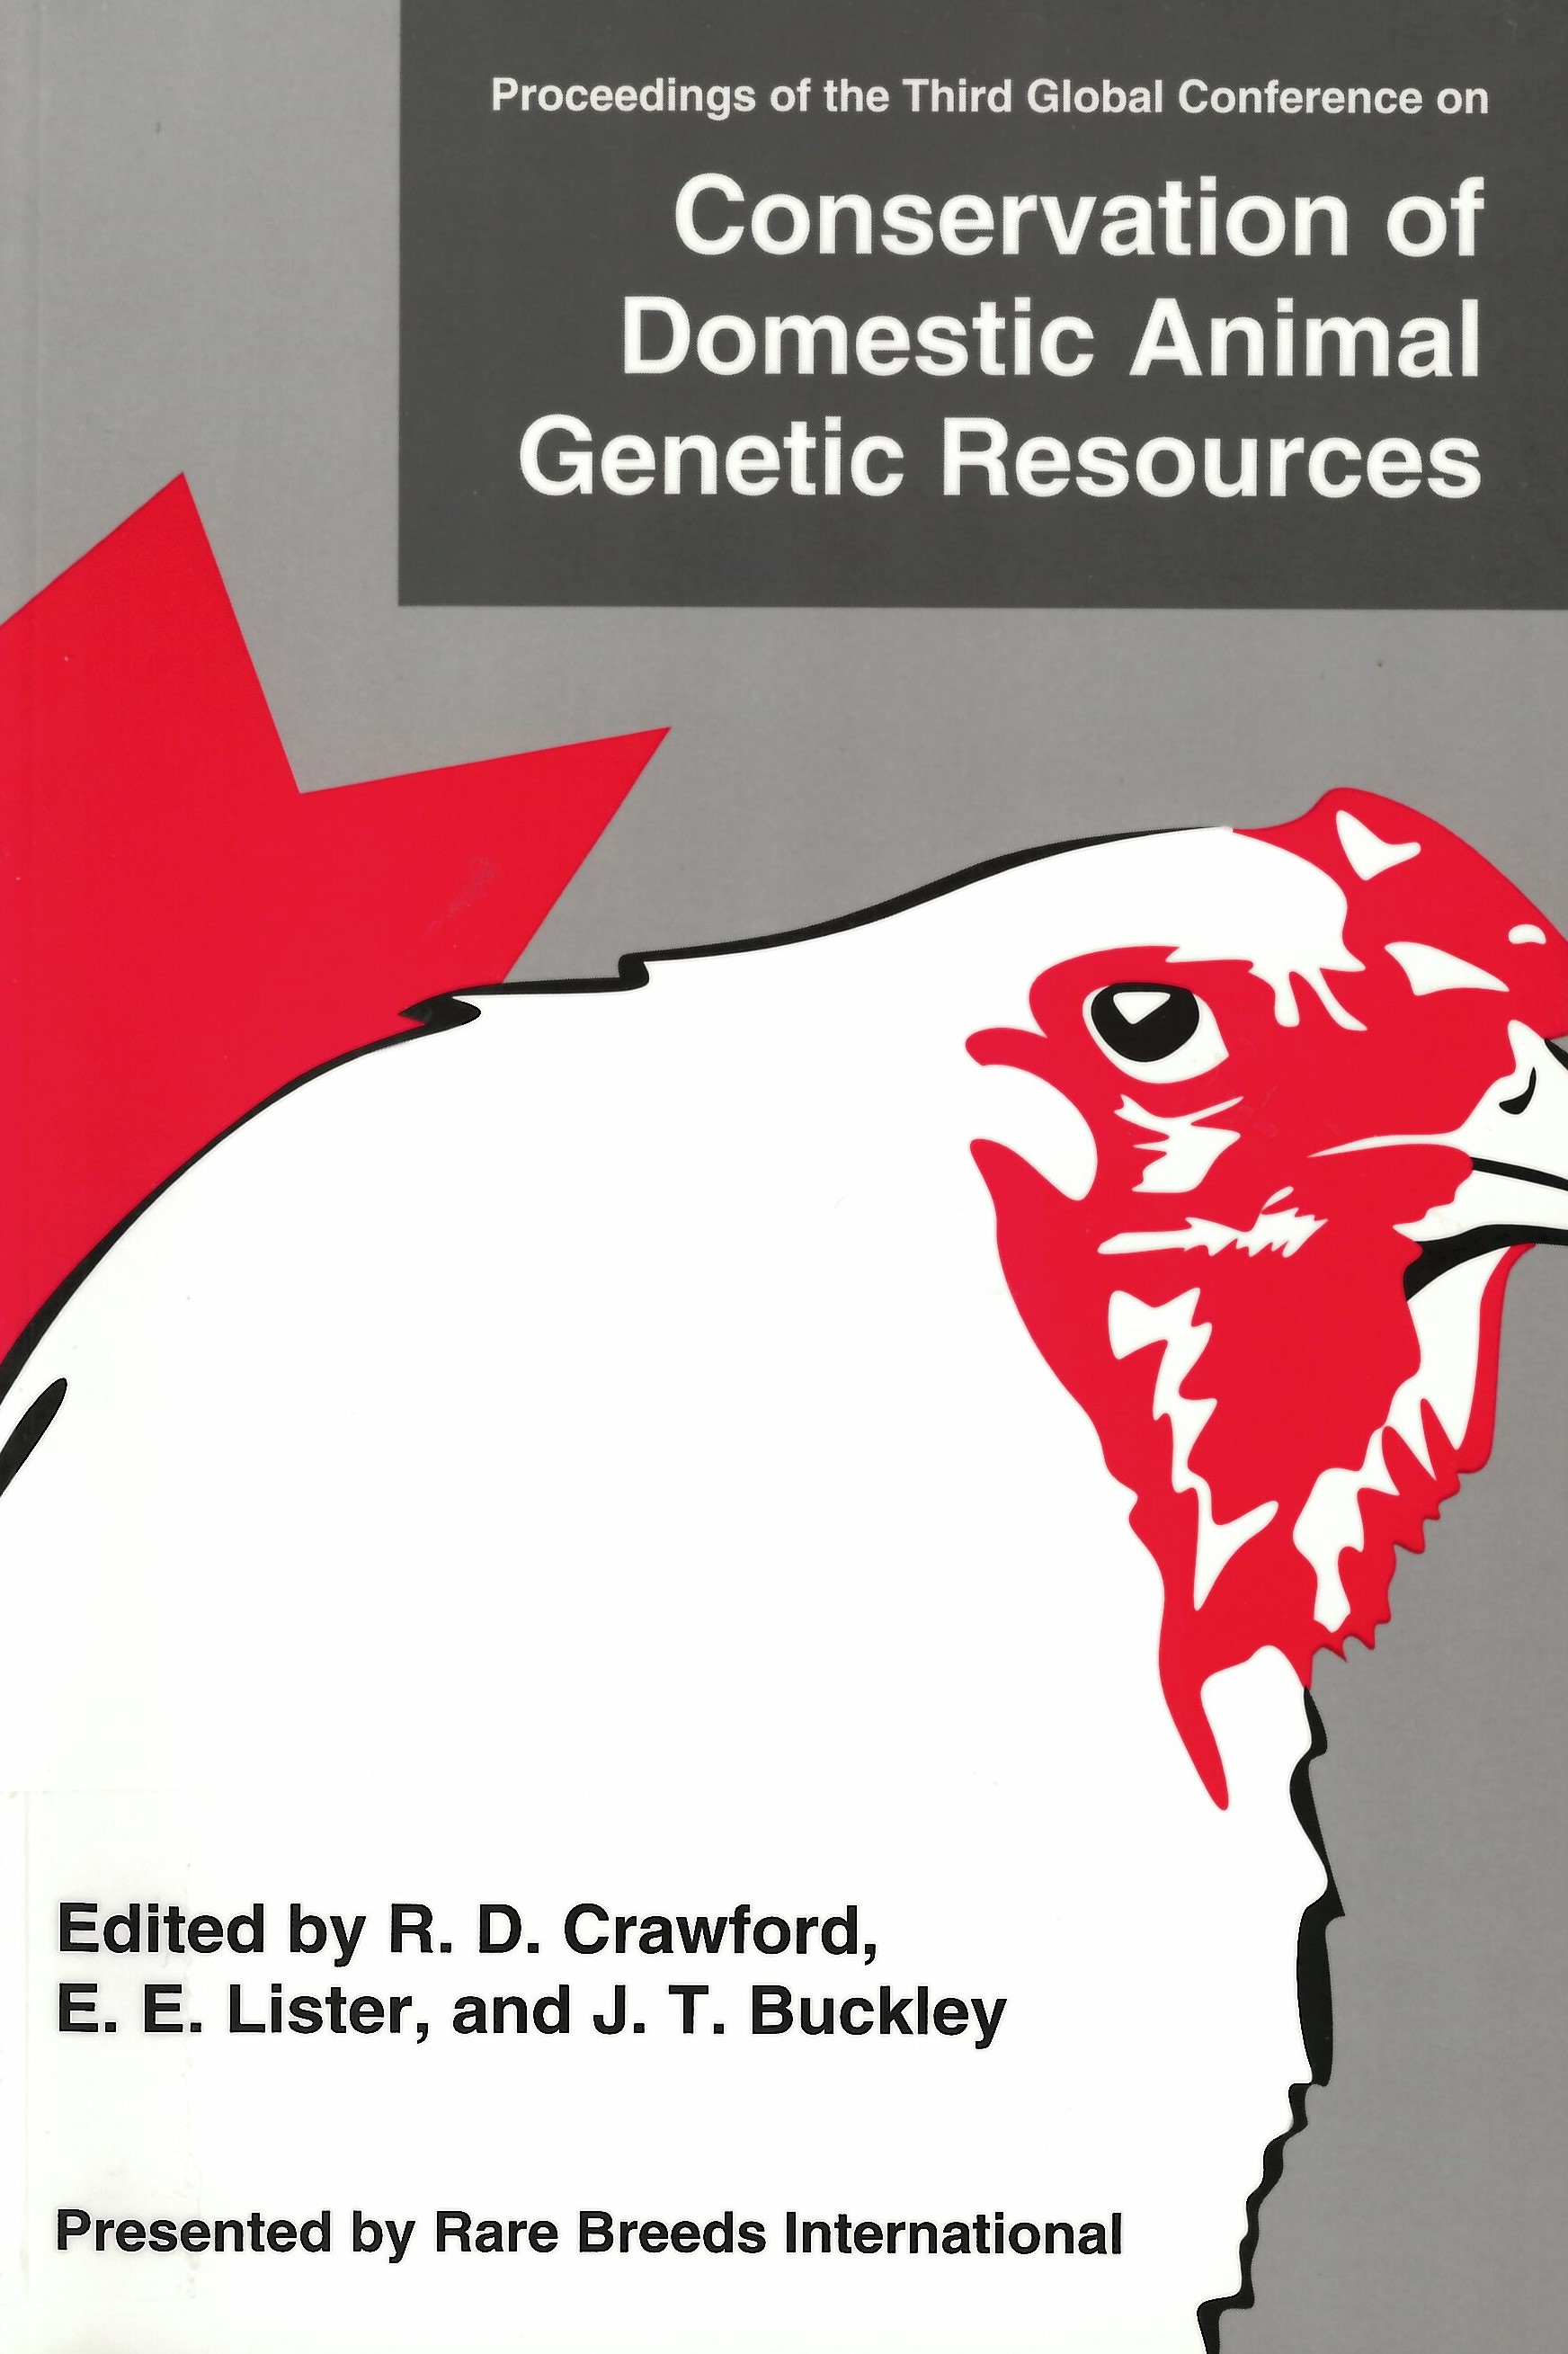 Proceedings of the Third Global Conference on Conservation of Domestic Animal Genetic Resources, presented by Rare Breeds International, 1-5 August 1994, Queen's University, Kingston, Ontario, Canada